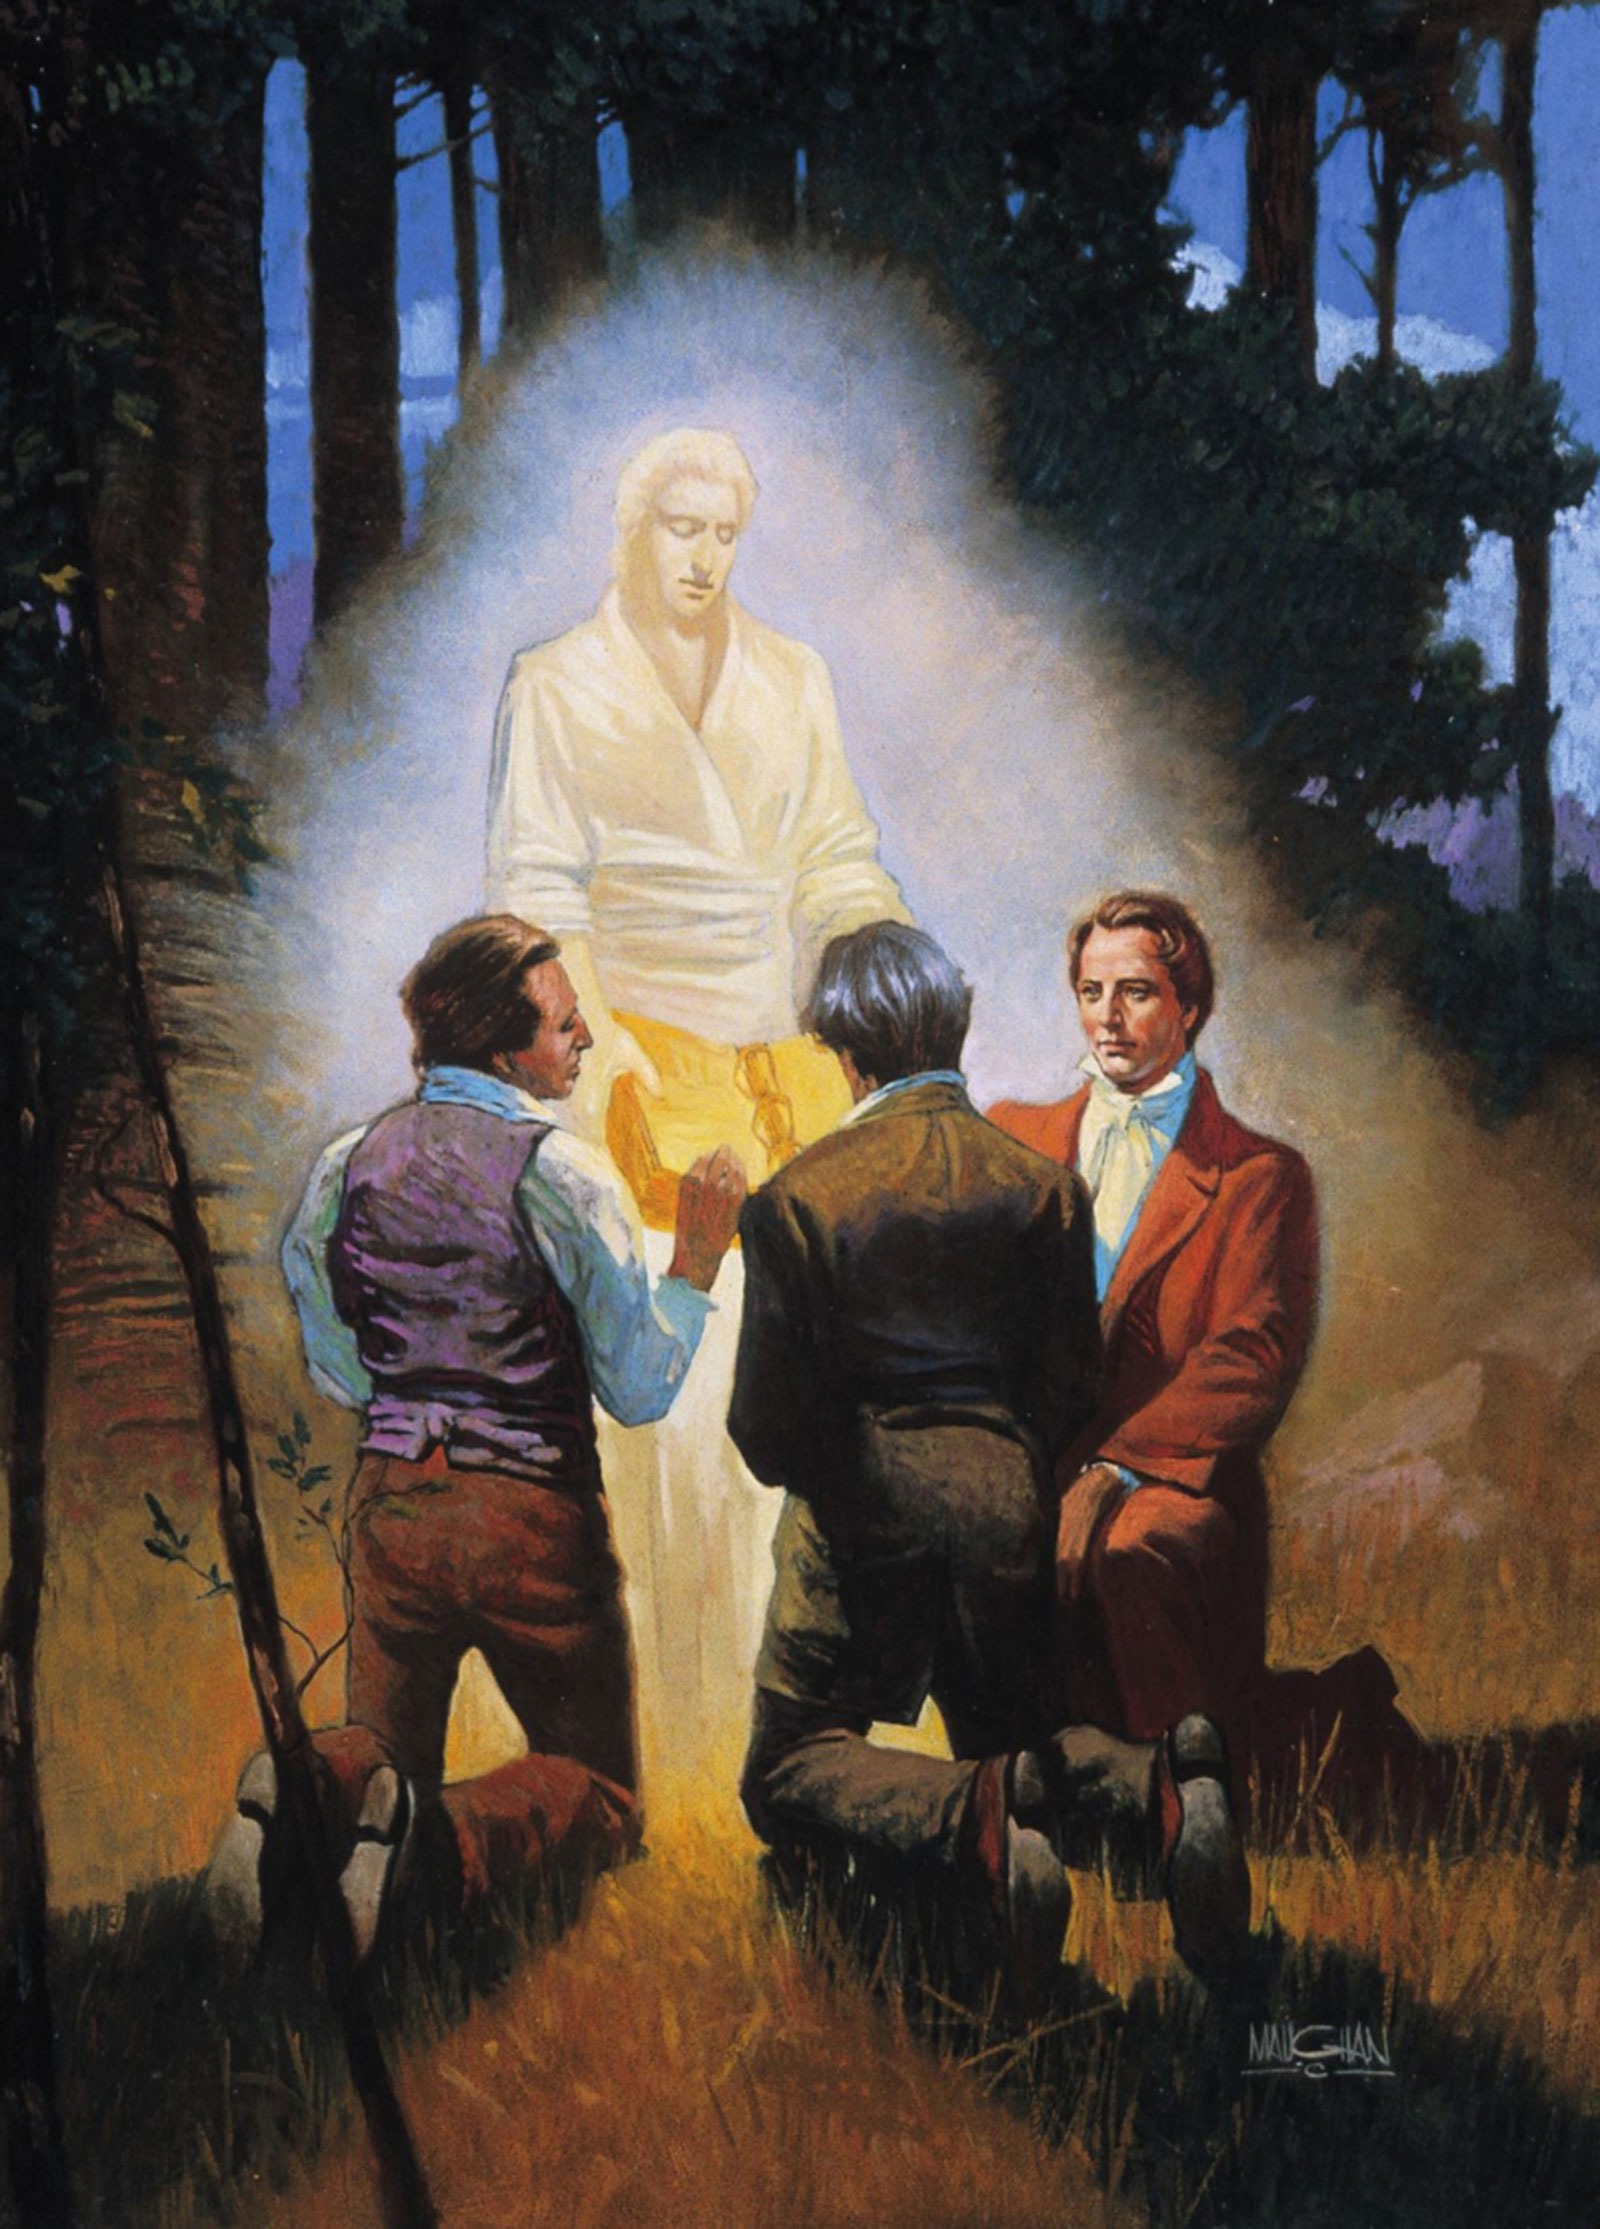 In a forest, a person in a white robe with light all around him holds a set of golden plates, showing it to three men who are kneeling.